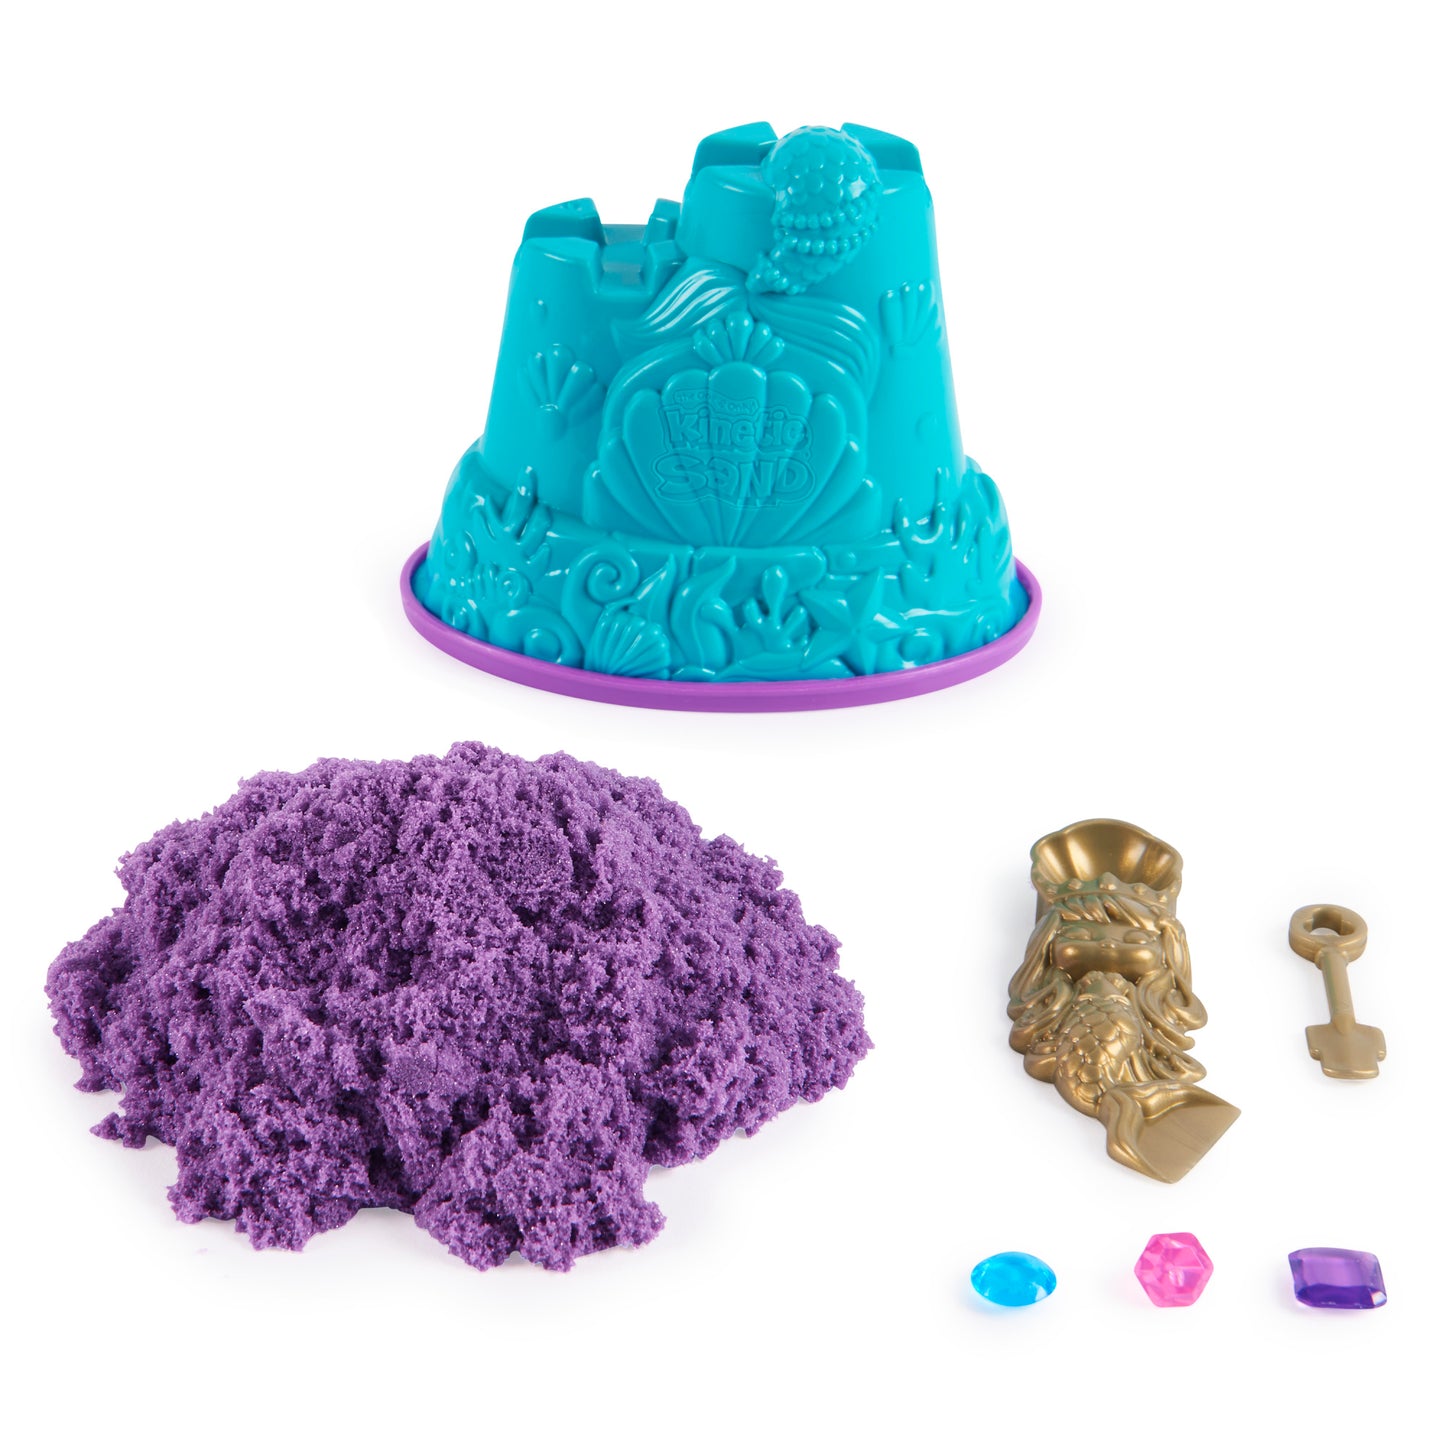 Kinetic Sand Shimmer, Mermaid Treasure with 6oz of Shimmer Kinetic Sand (Styles May Vary), Surprise Hidden Tool, Play Sand Sensory Toys for Kids 3 and Up